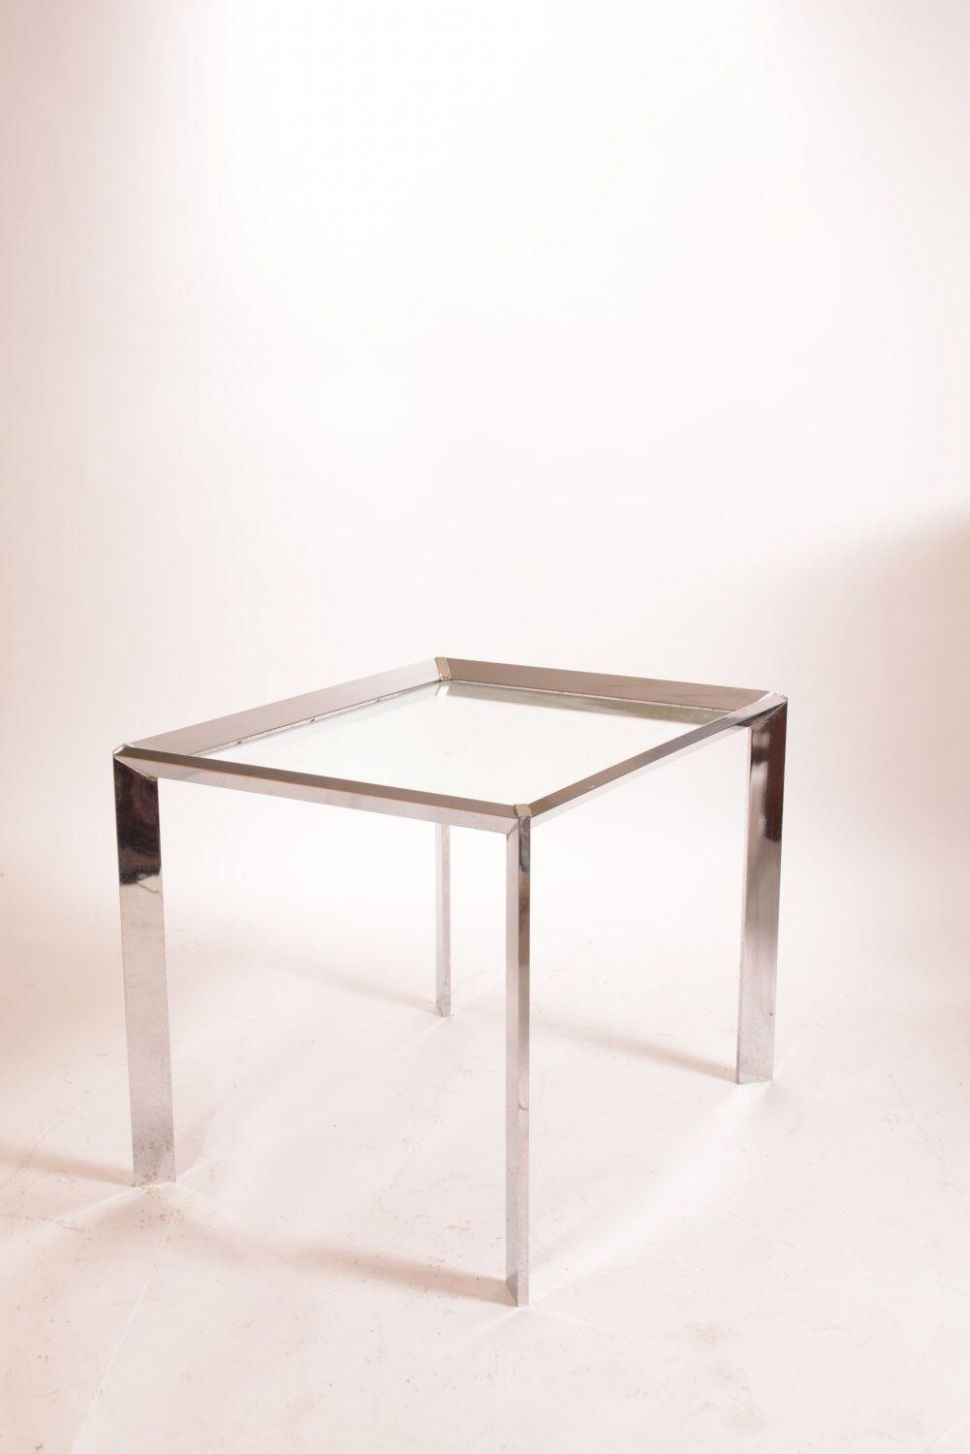 Home Design : Mirrored End Tables Elegant Smart Round Marble Top Regarding Smart Large Round Marble Top Coffee Tables (View 4 of 30)